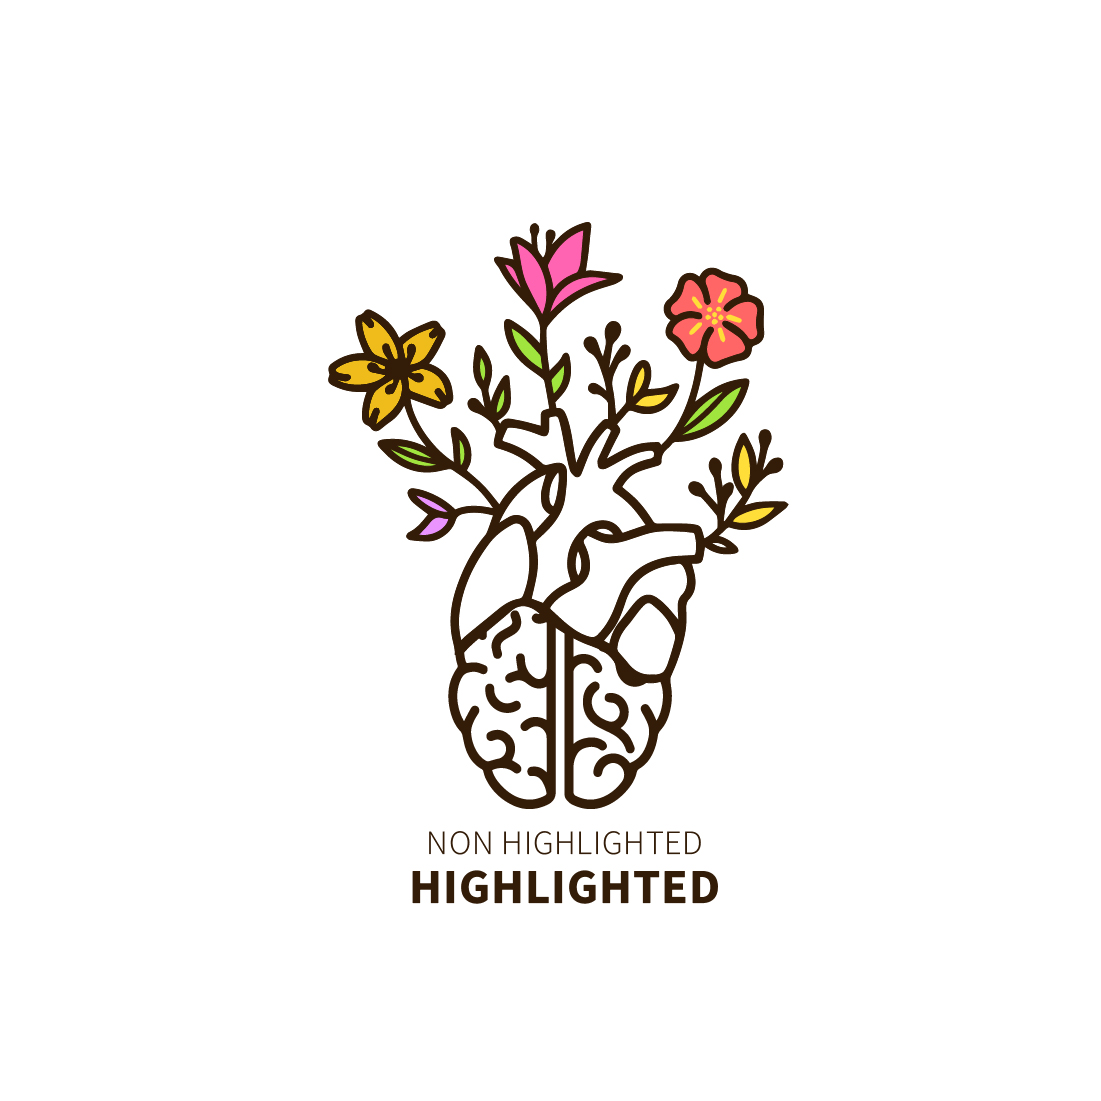 Brain and Heart Care Logo cover image.